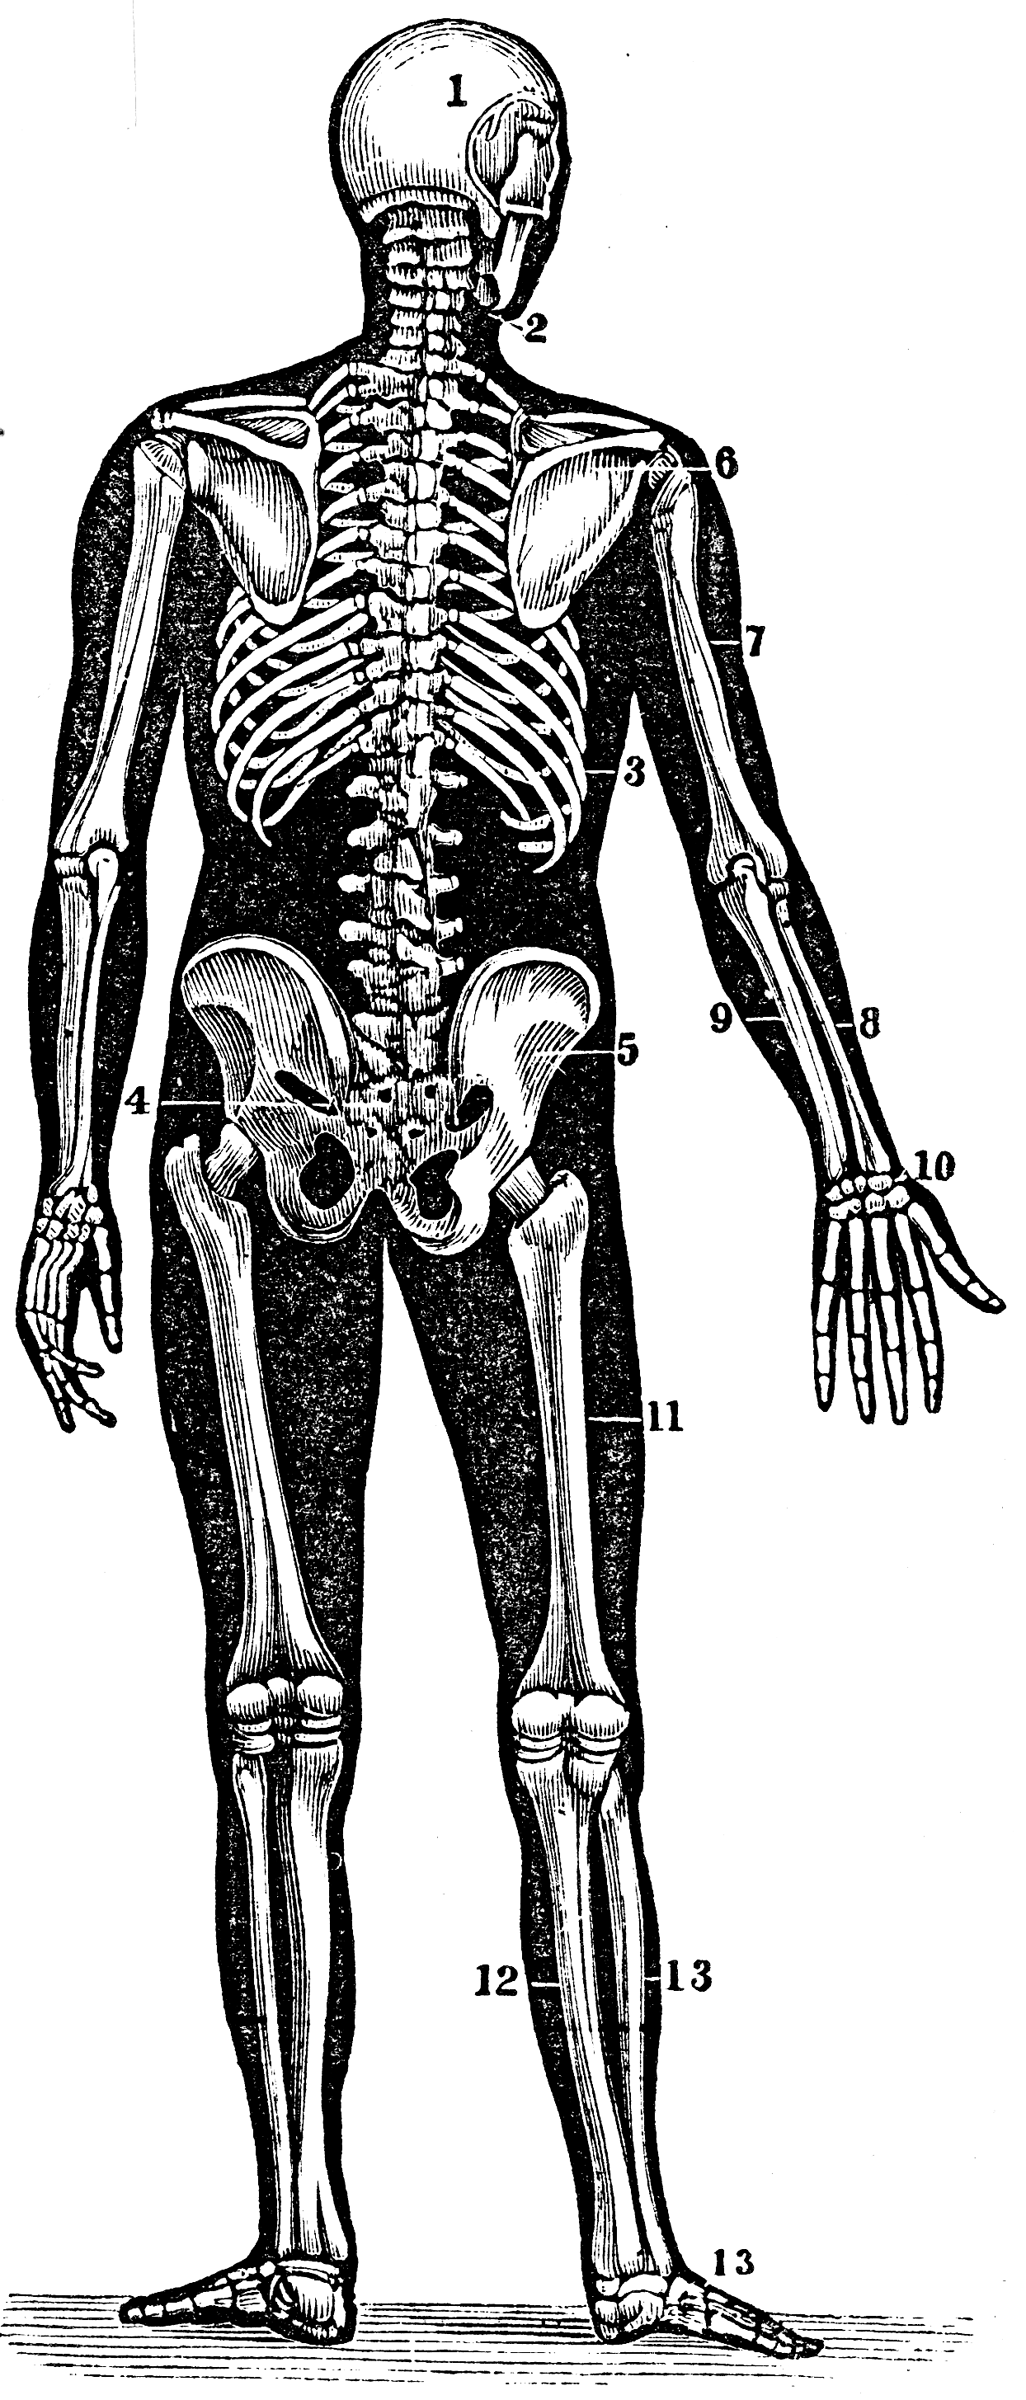 Back View of a Human Skeleton | ClipArt ETC